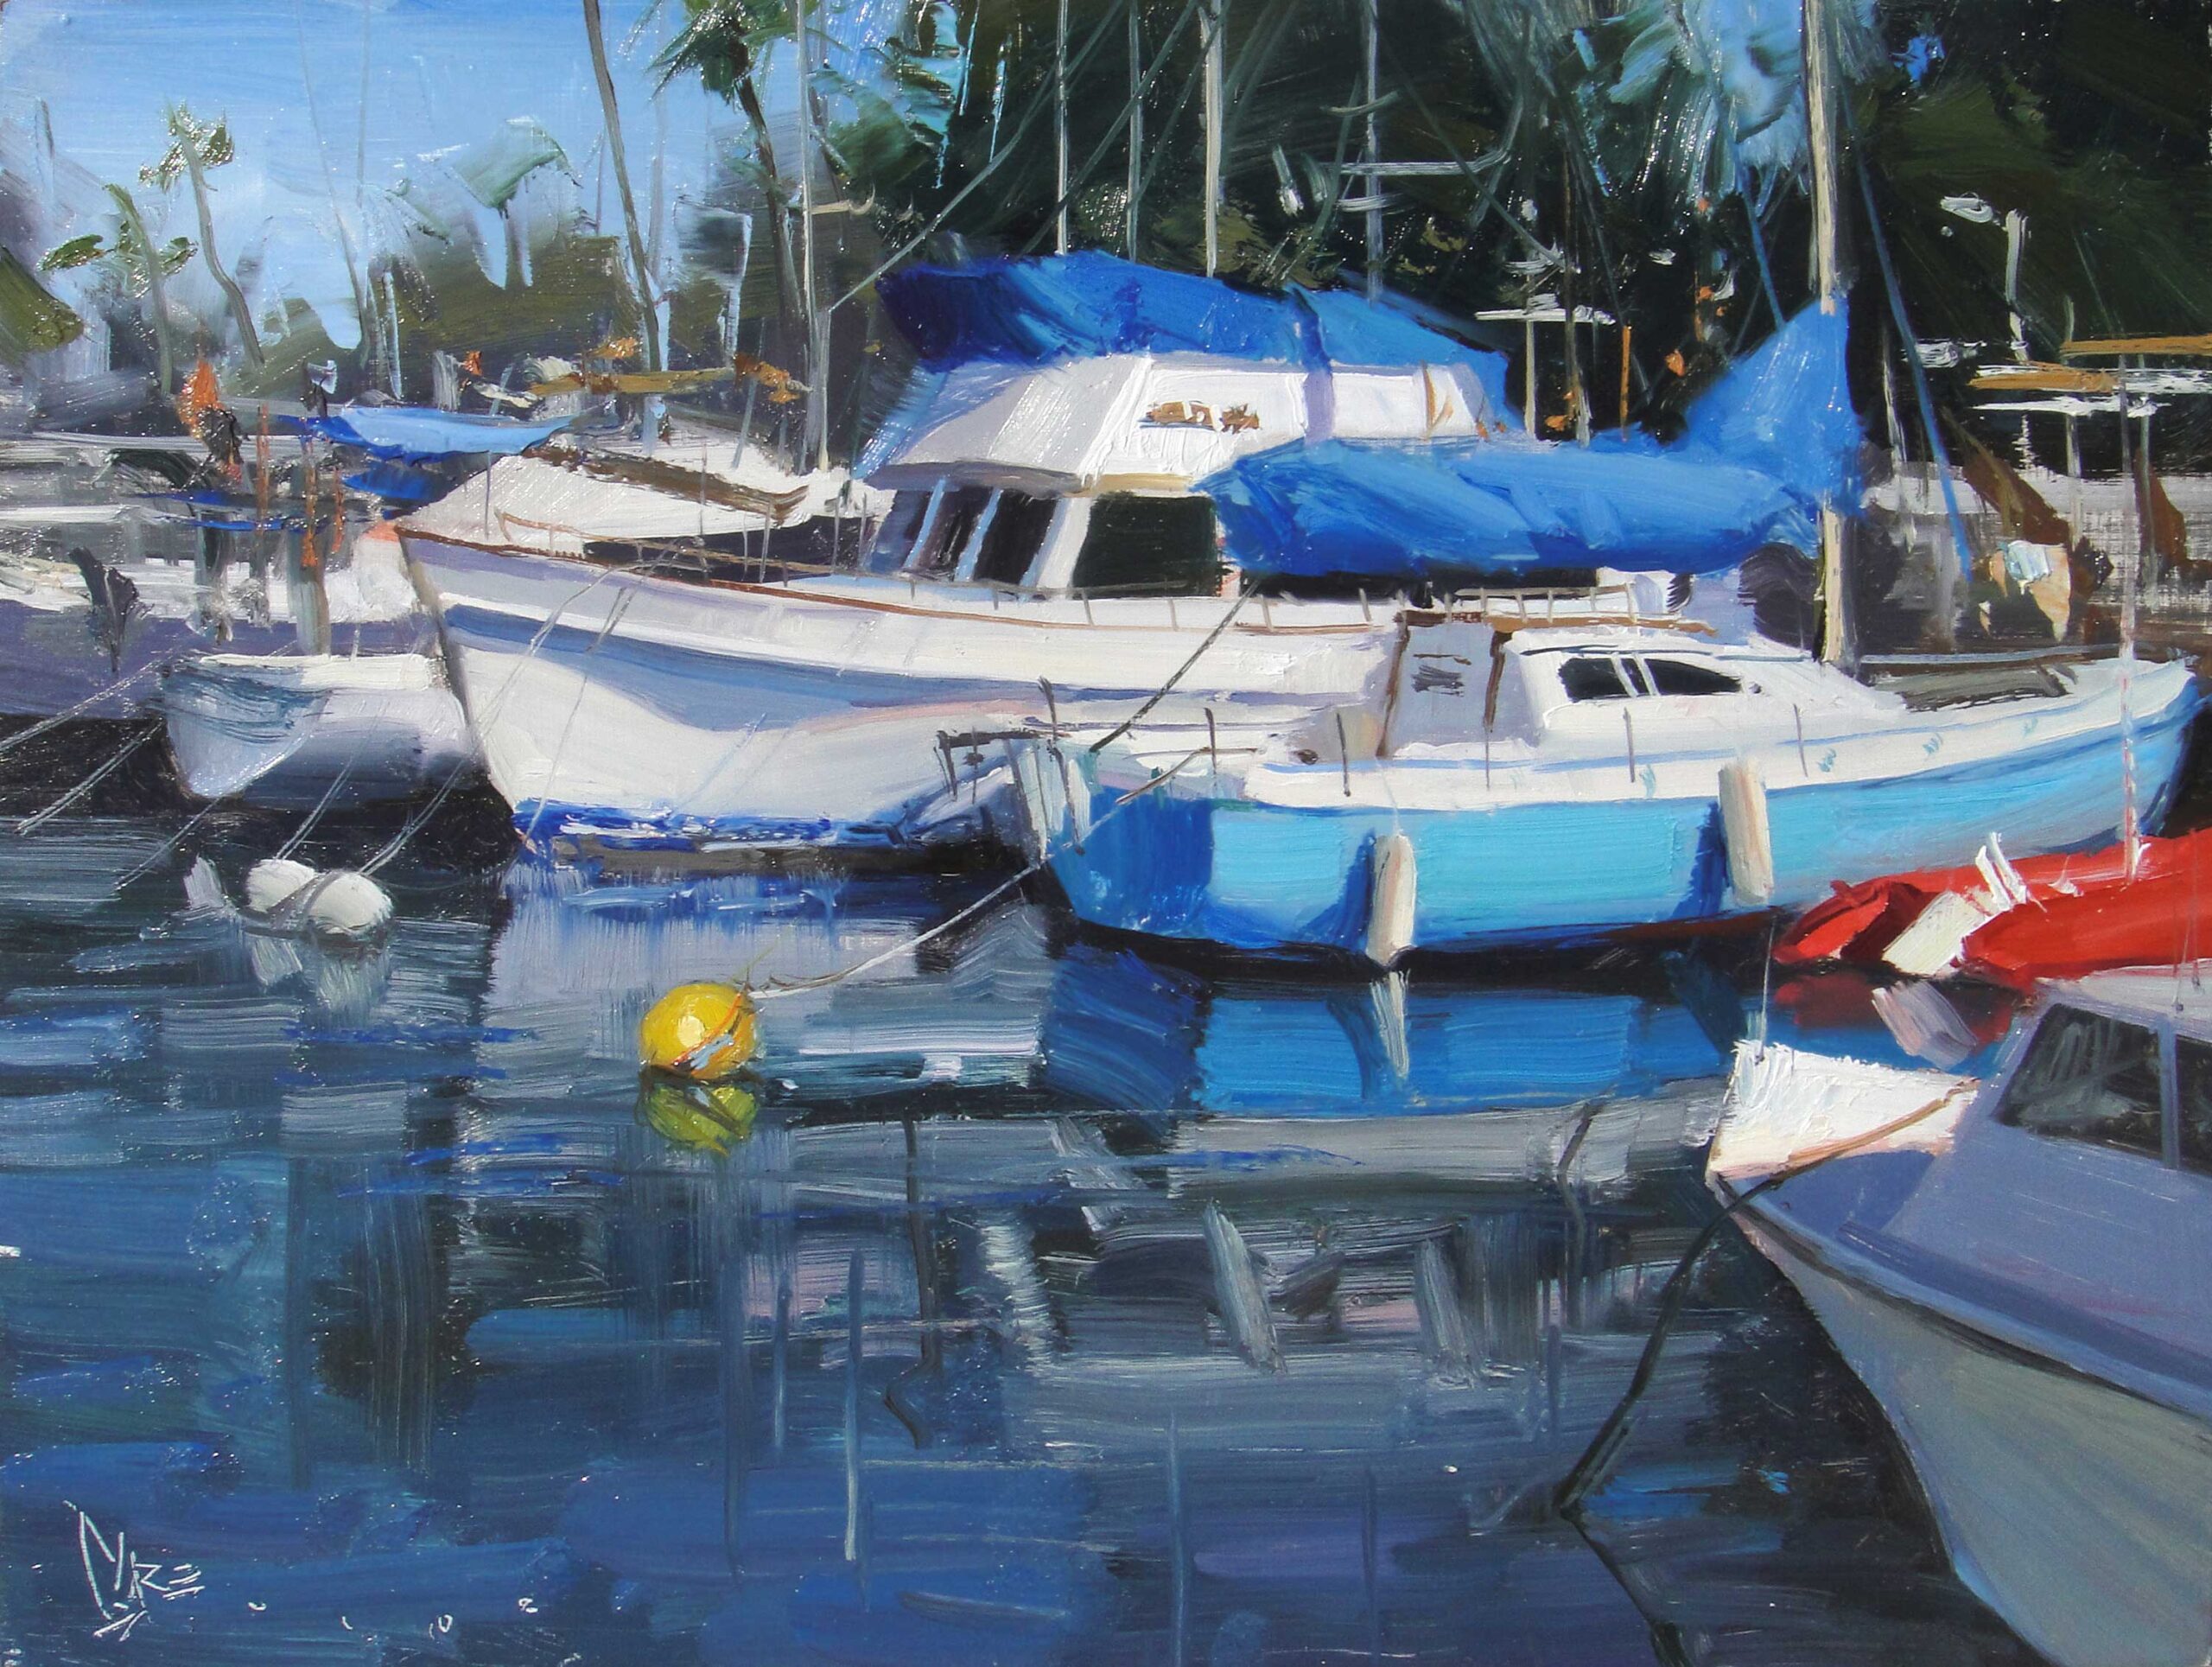 Josh Clare, "Docked," 24 x 36 inches, oil on linen